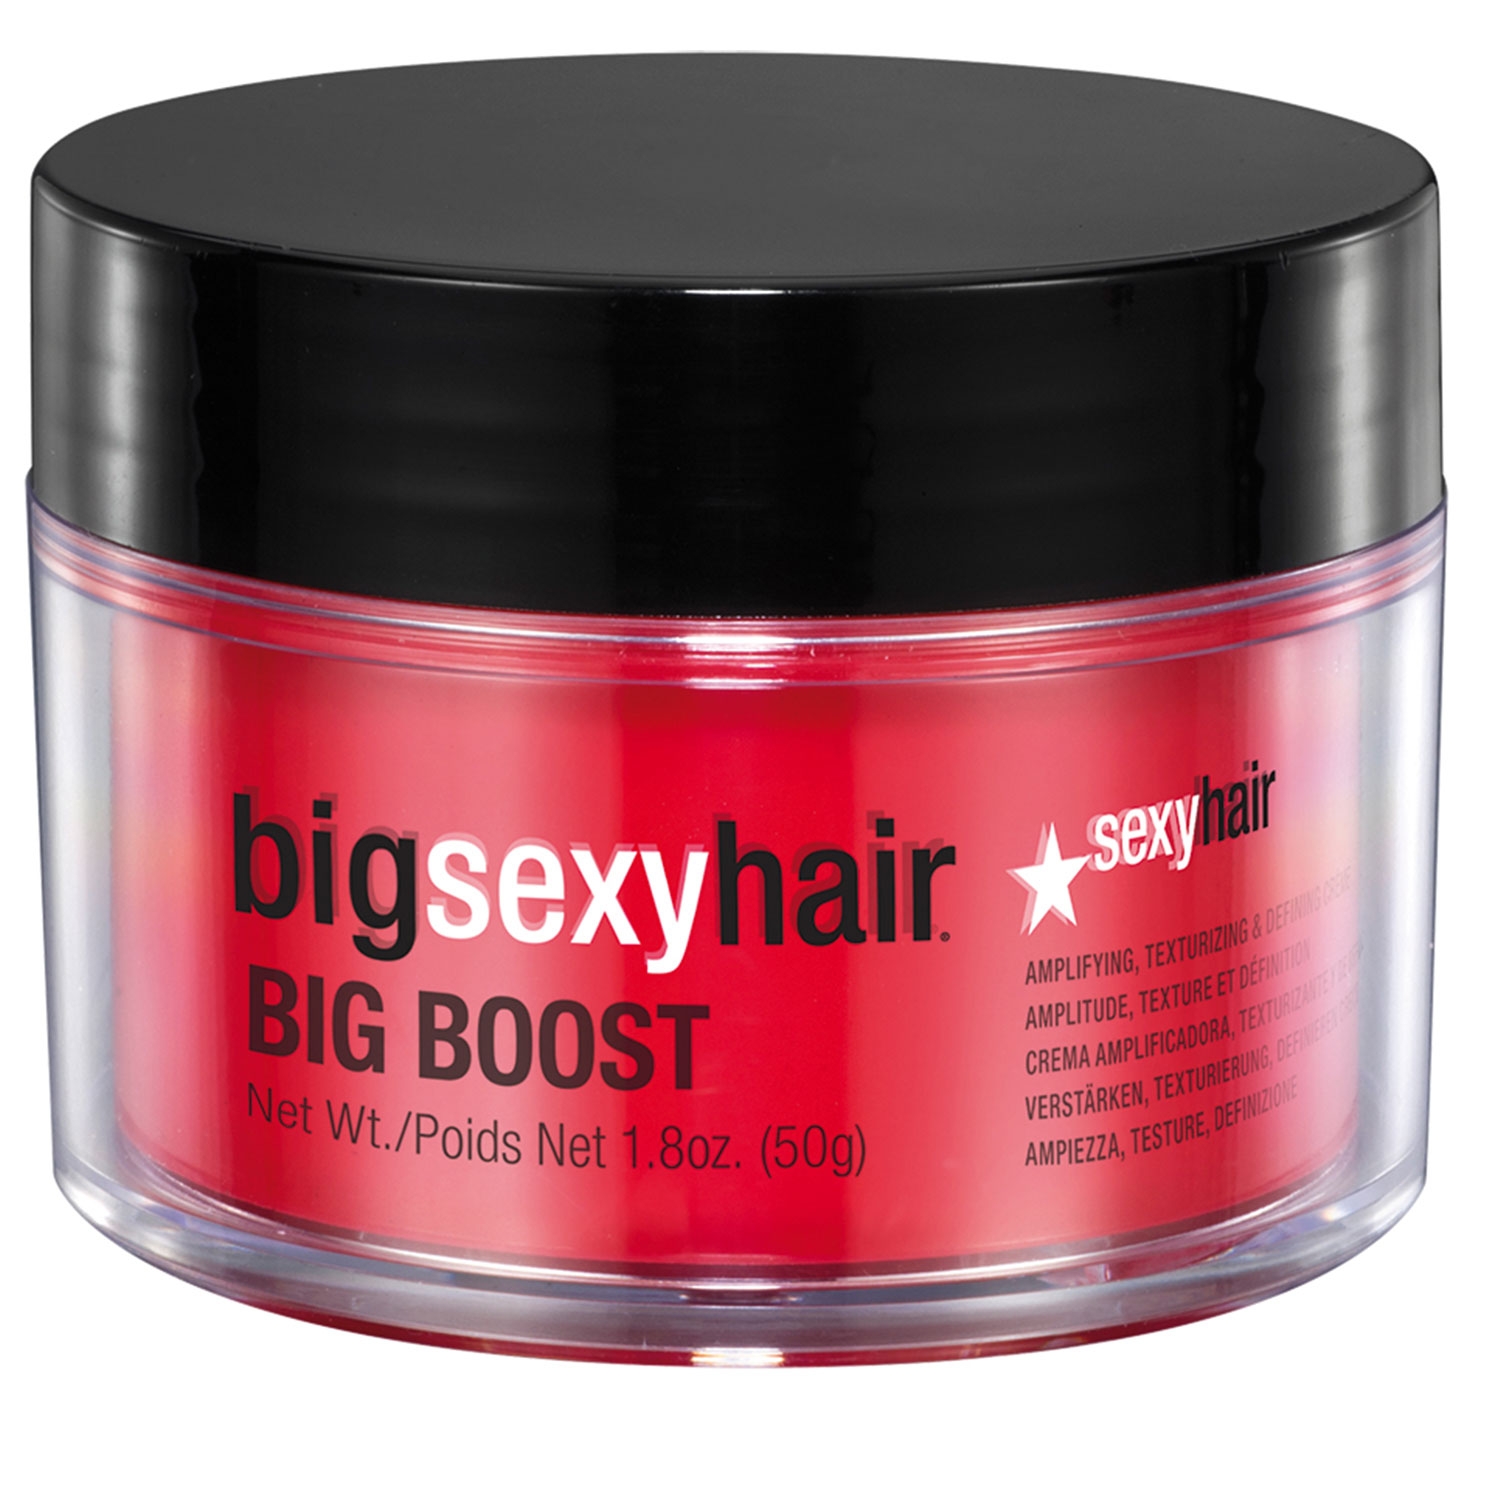 Product image from Big Sexy Hair - Big Boost